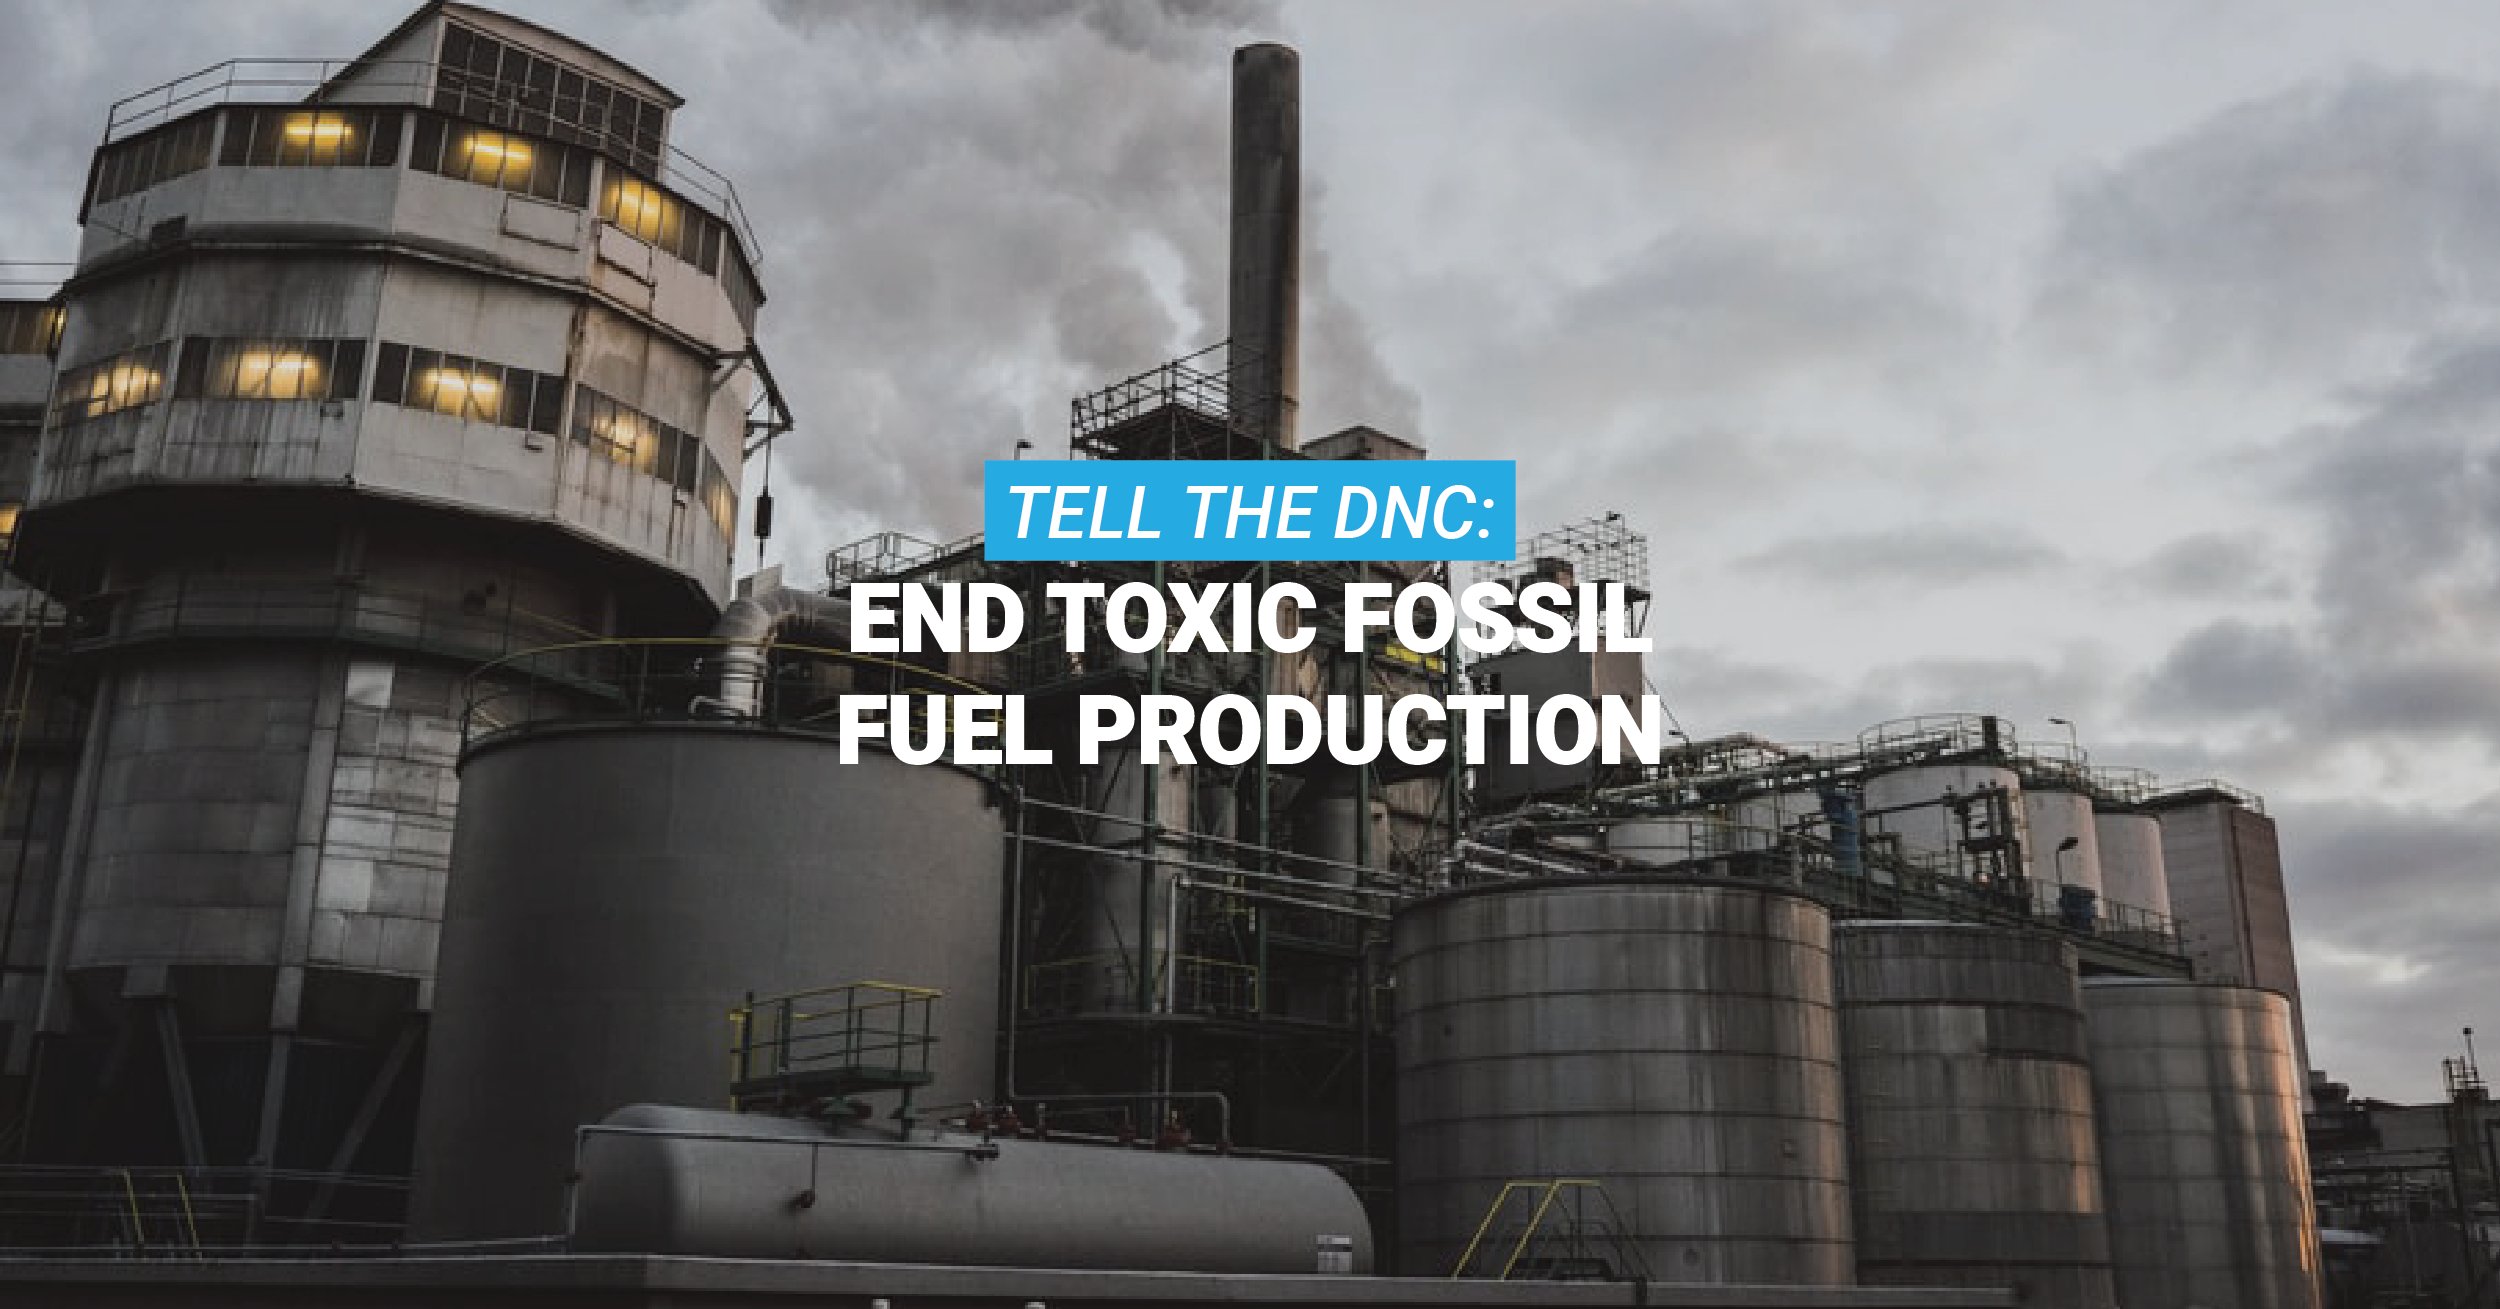 Tens of Thousands Urge Democrats to Strengthen 2020 Platform on Fossil Fuels